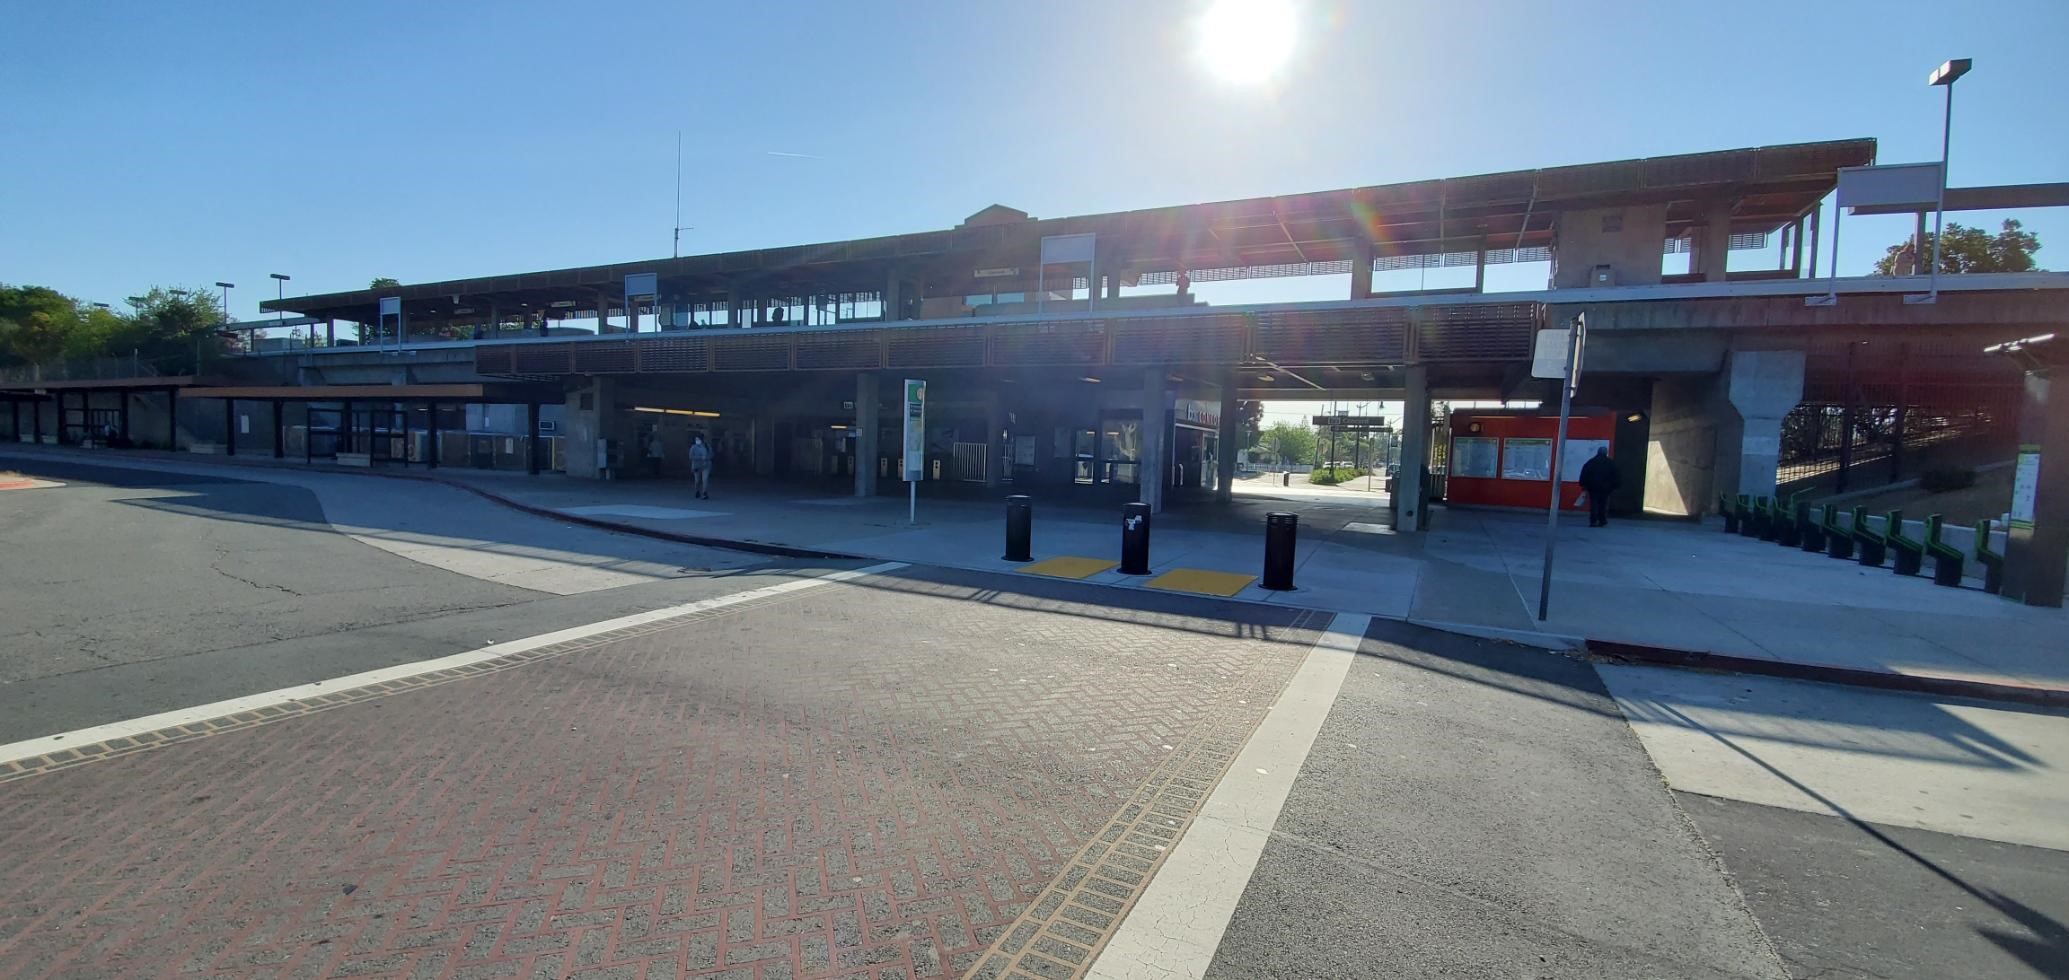 Concord Station exterior